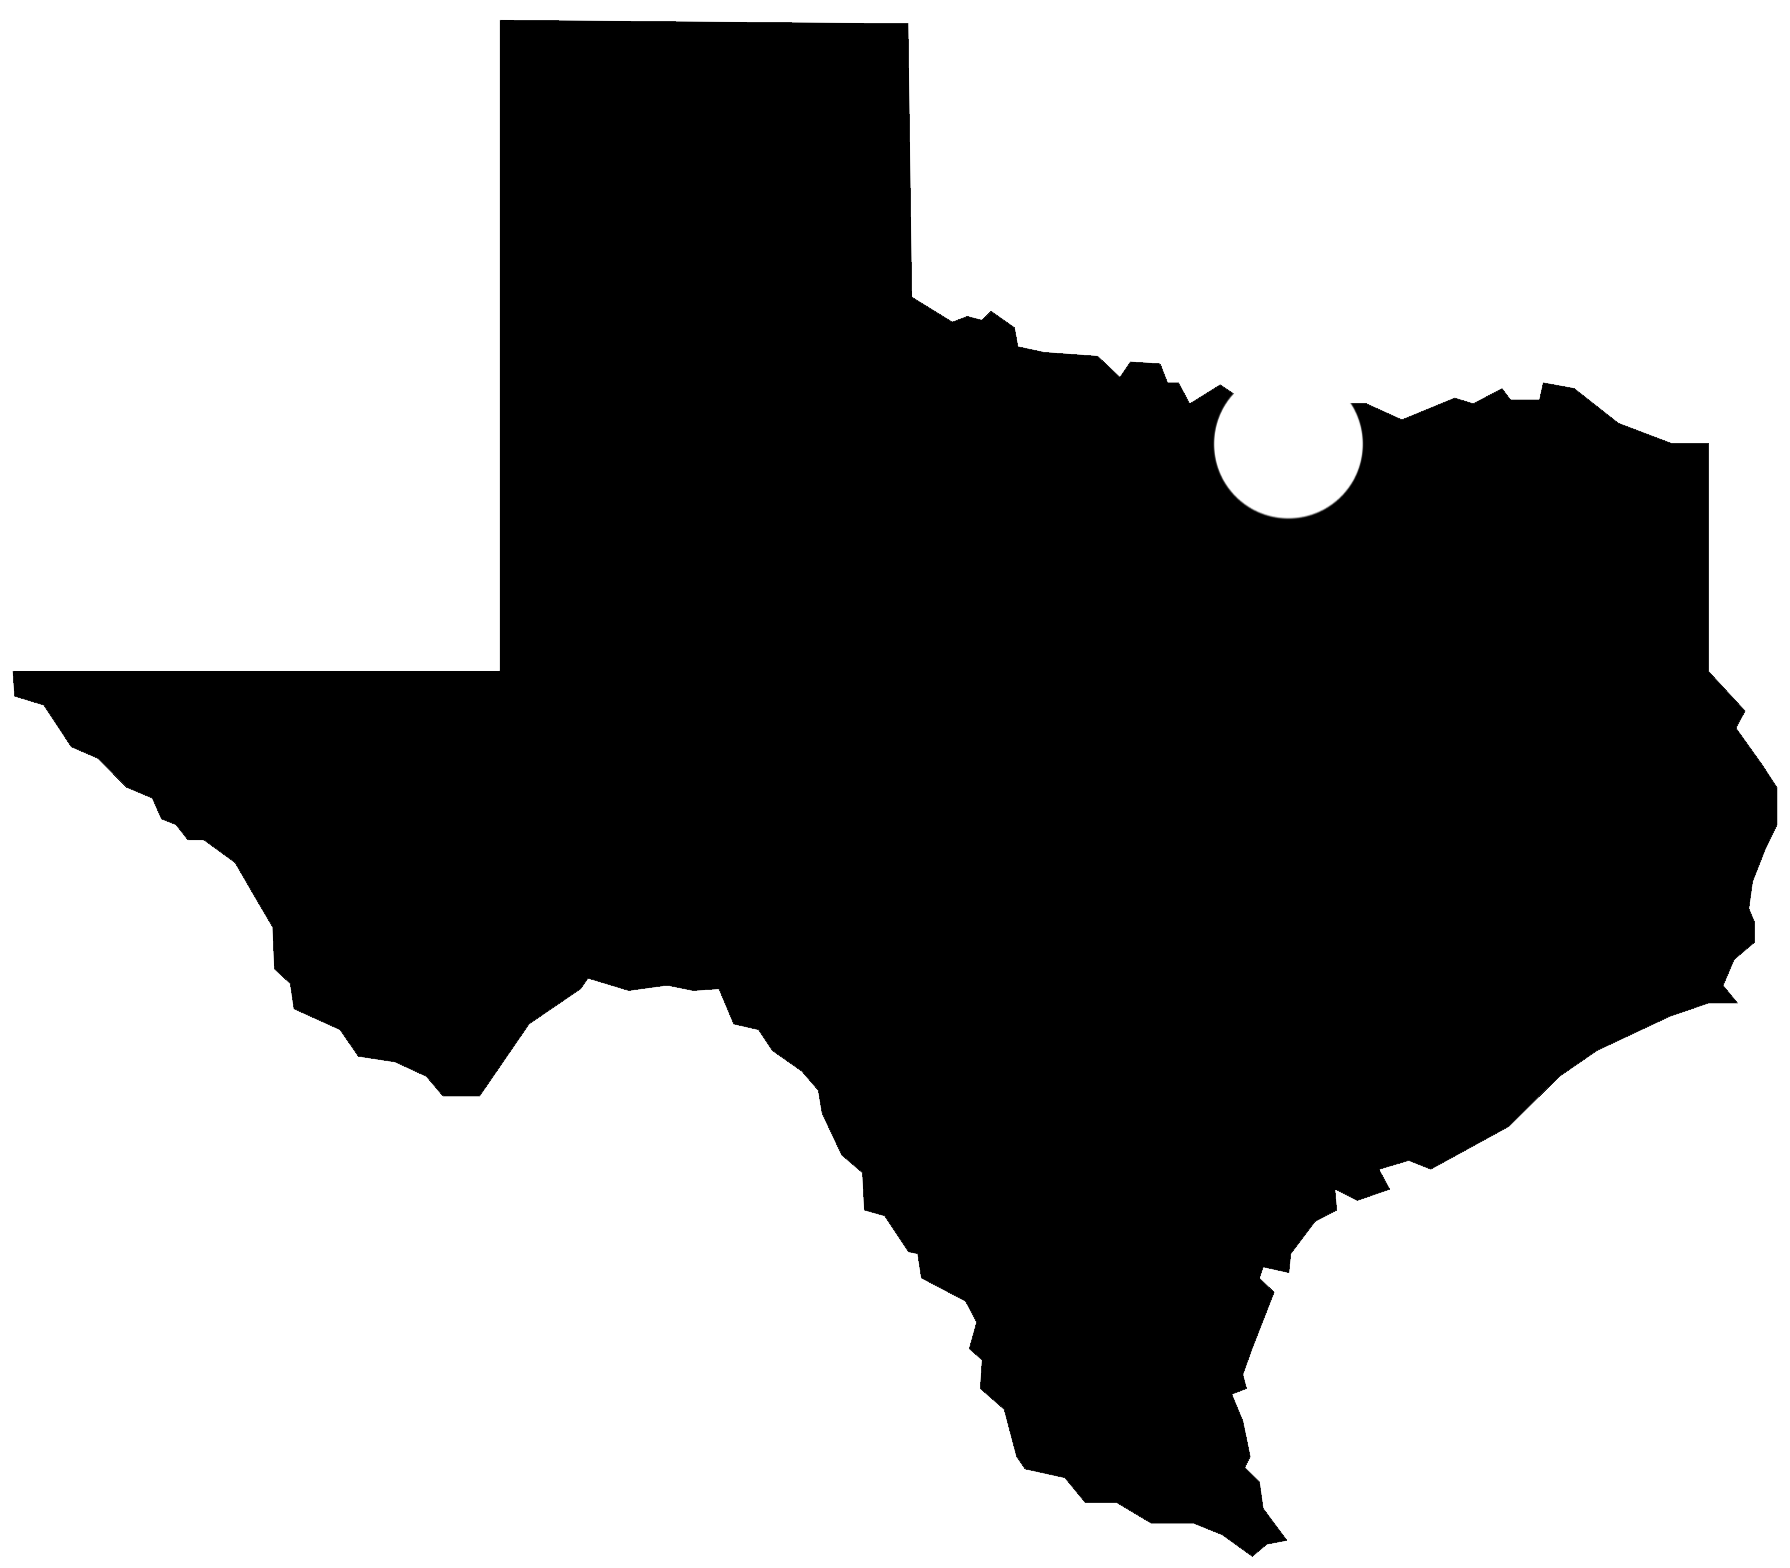 A small map showing the location of Nocona